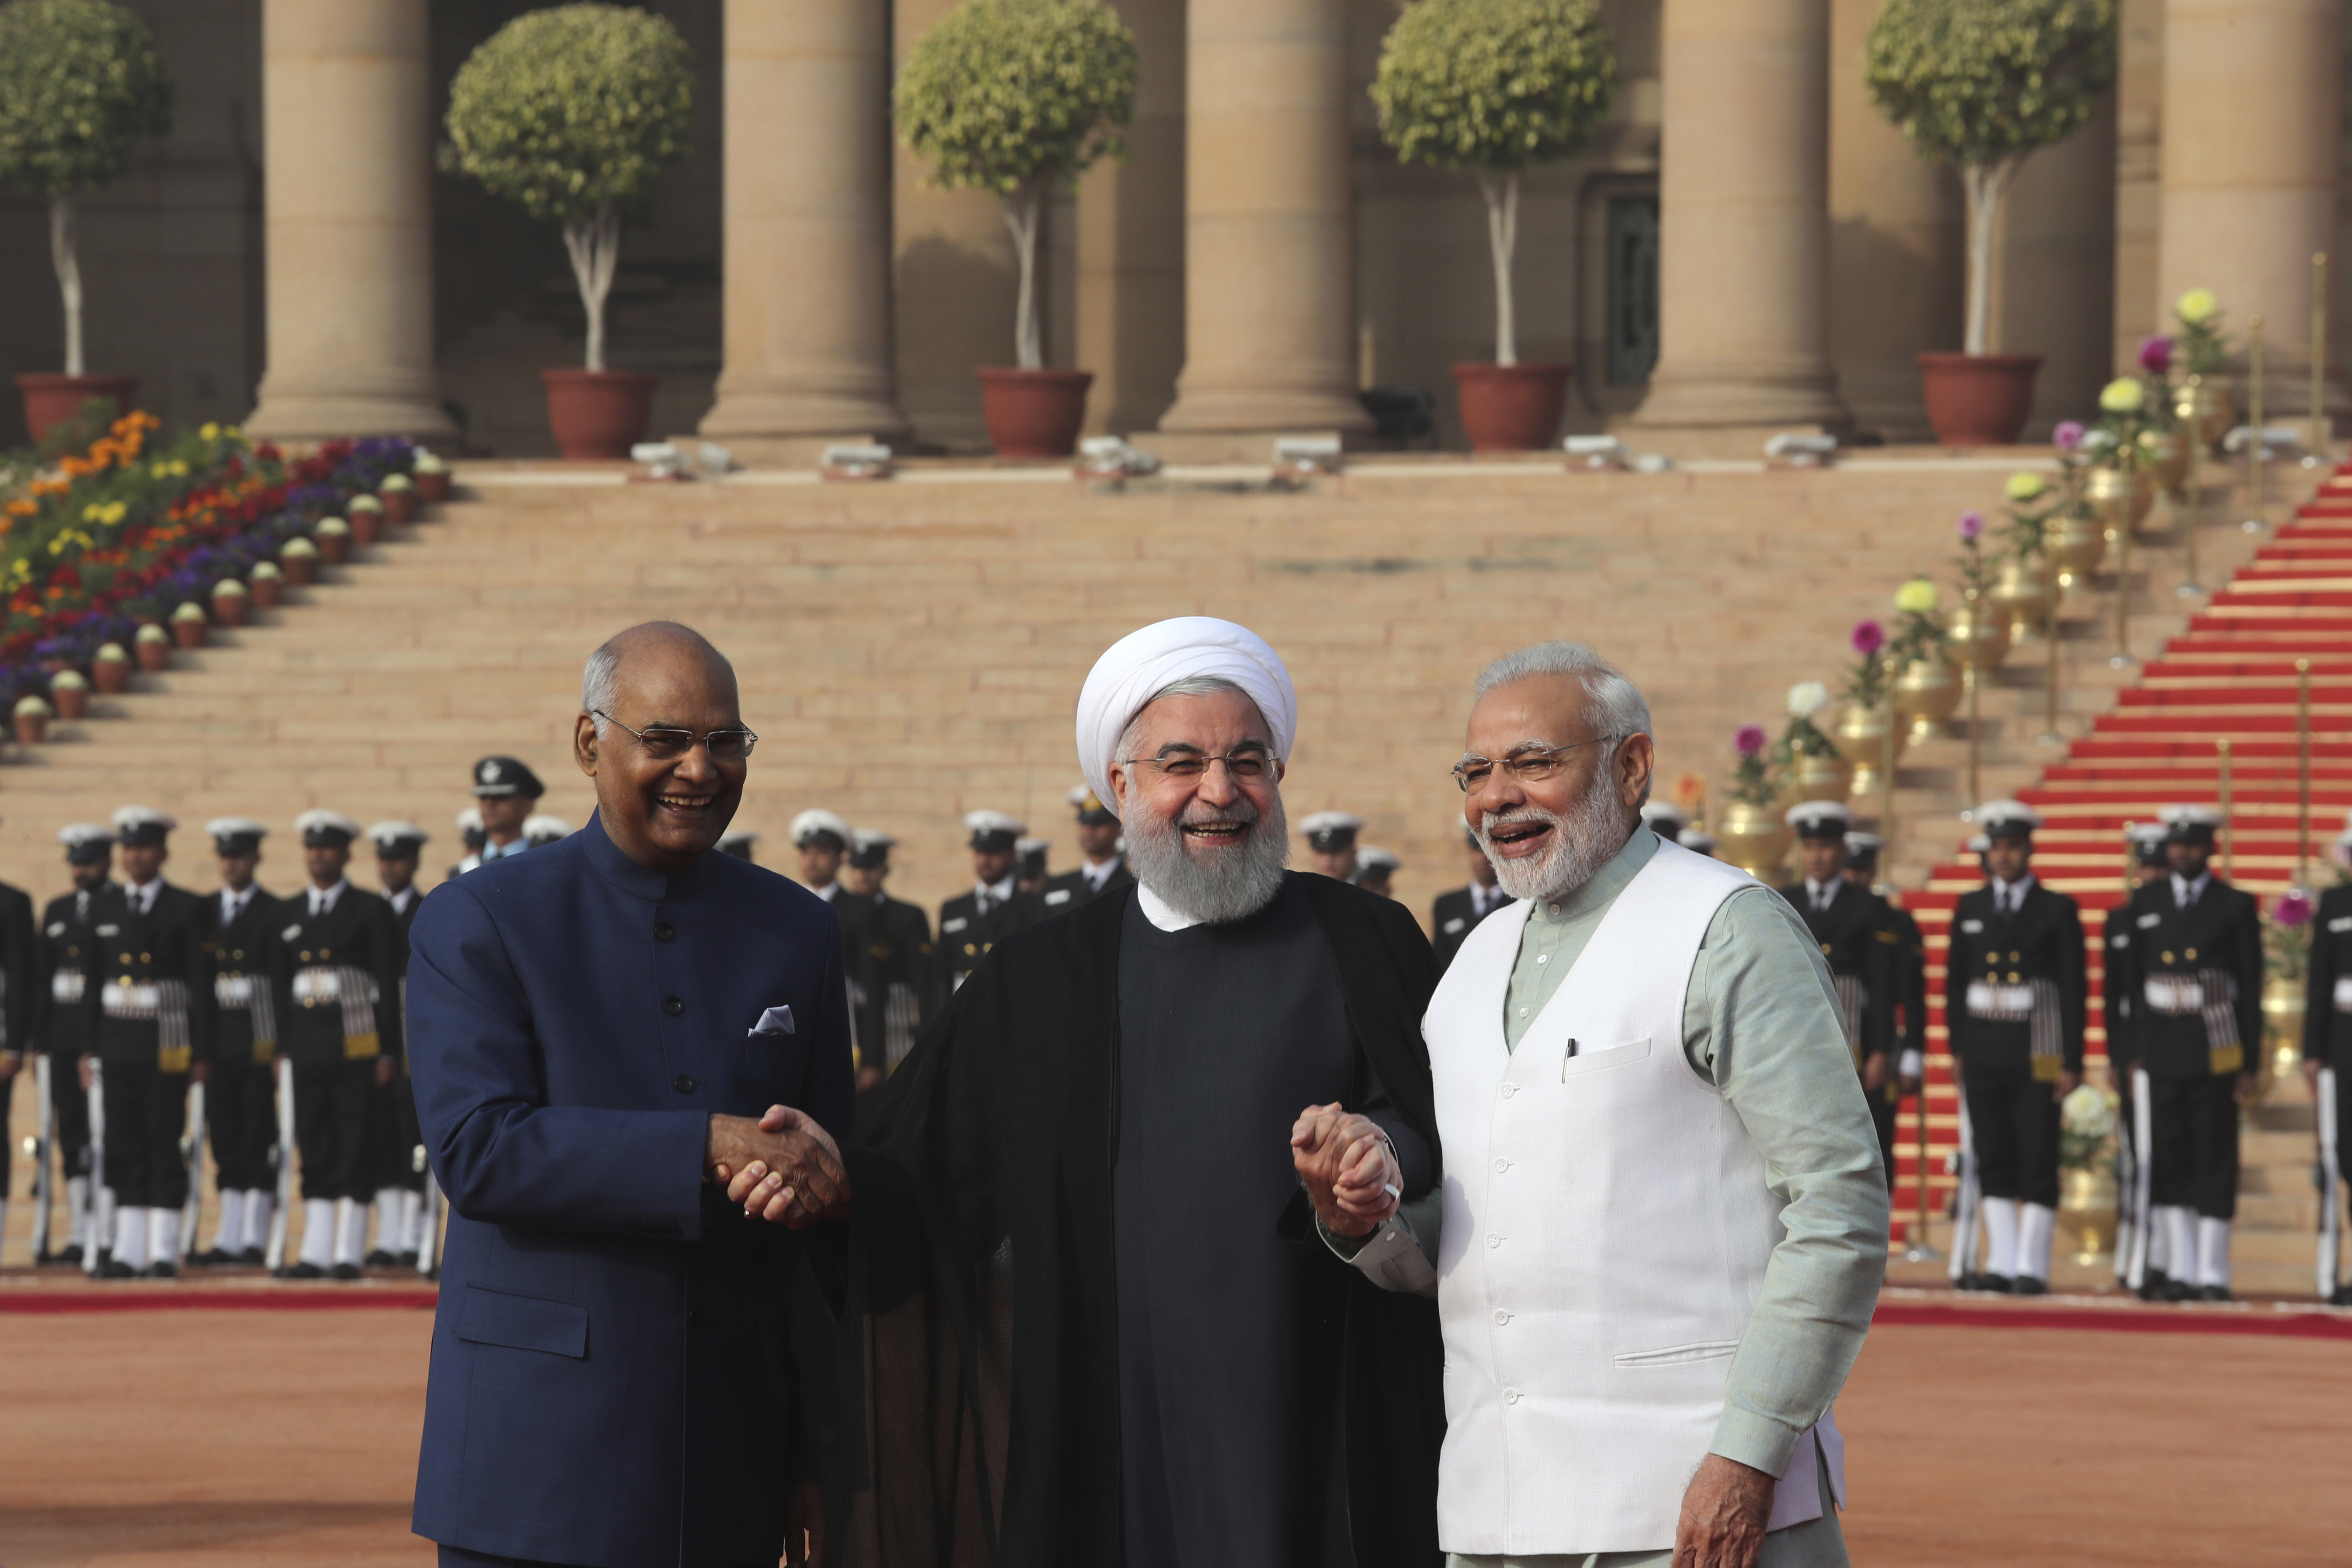 Iranian President Hassan Rouhani, center, holds hands of his Indian counterpart Ram Nath Kovind, left, and Indian Prime Minister Narendra Modi during his ceremonial reception at the Indian presidential palace, in New Delhi, India, Saturday, Feb. 17, 2018. Rouhani, who is on three days state visit to India has strongly criticized the Trump administration's recognition of Jerusalem as Israel's capital and urged Muslims to support the Palestinian cause. (AP Photo/Manish Swarup)